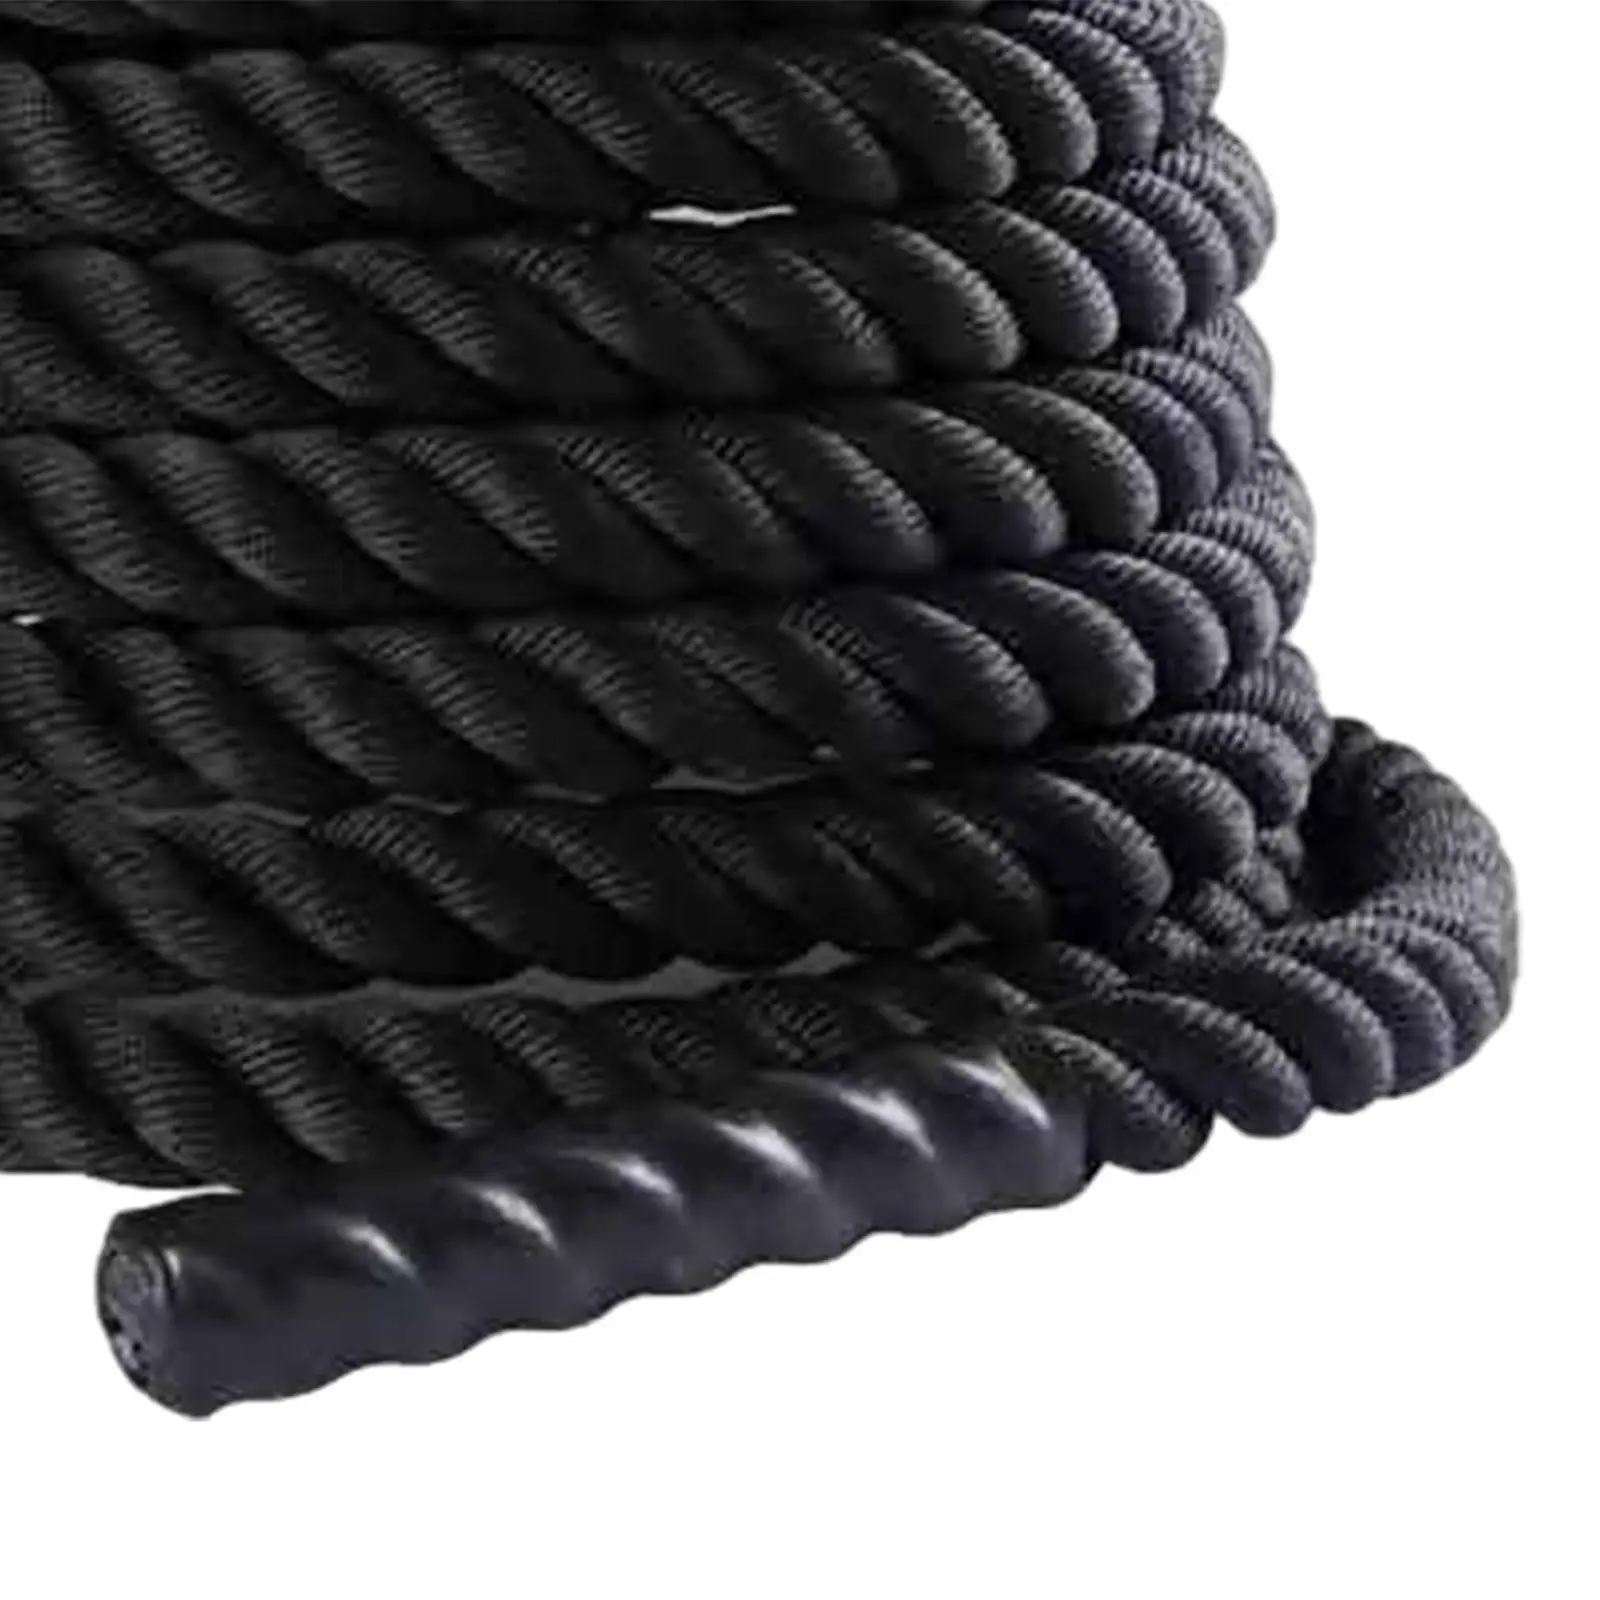 Battle Exercise Training Rope 2.8M/3M Workout Rope for Workout Battling Home Improve Strenght Training Fitness Gym Equipment